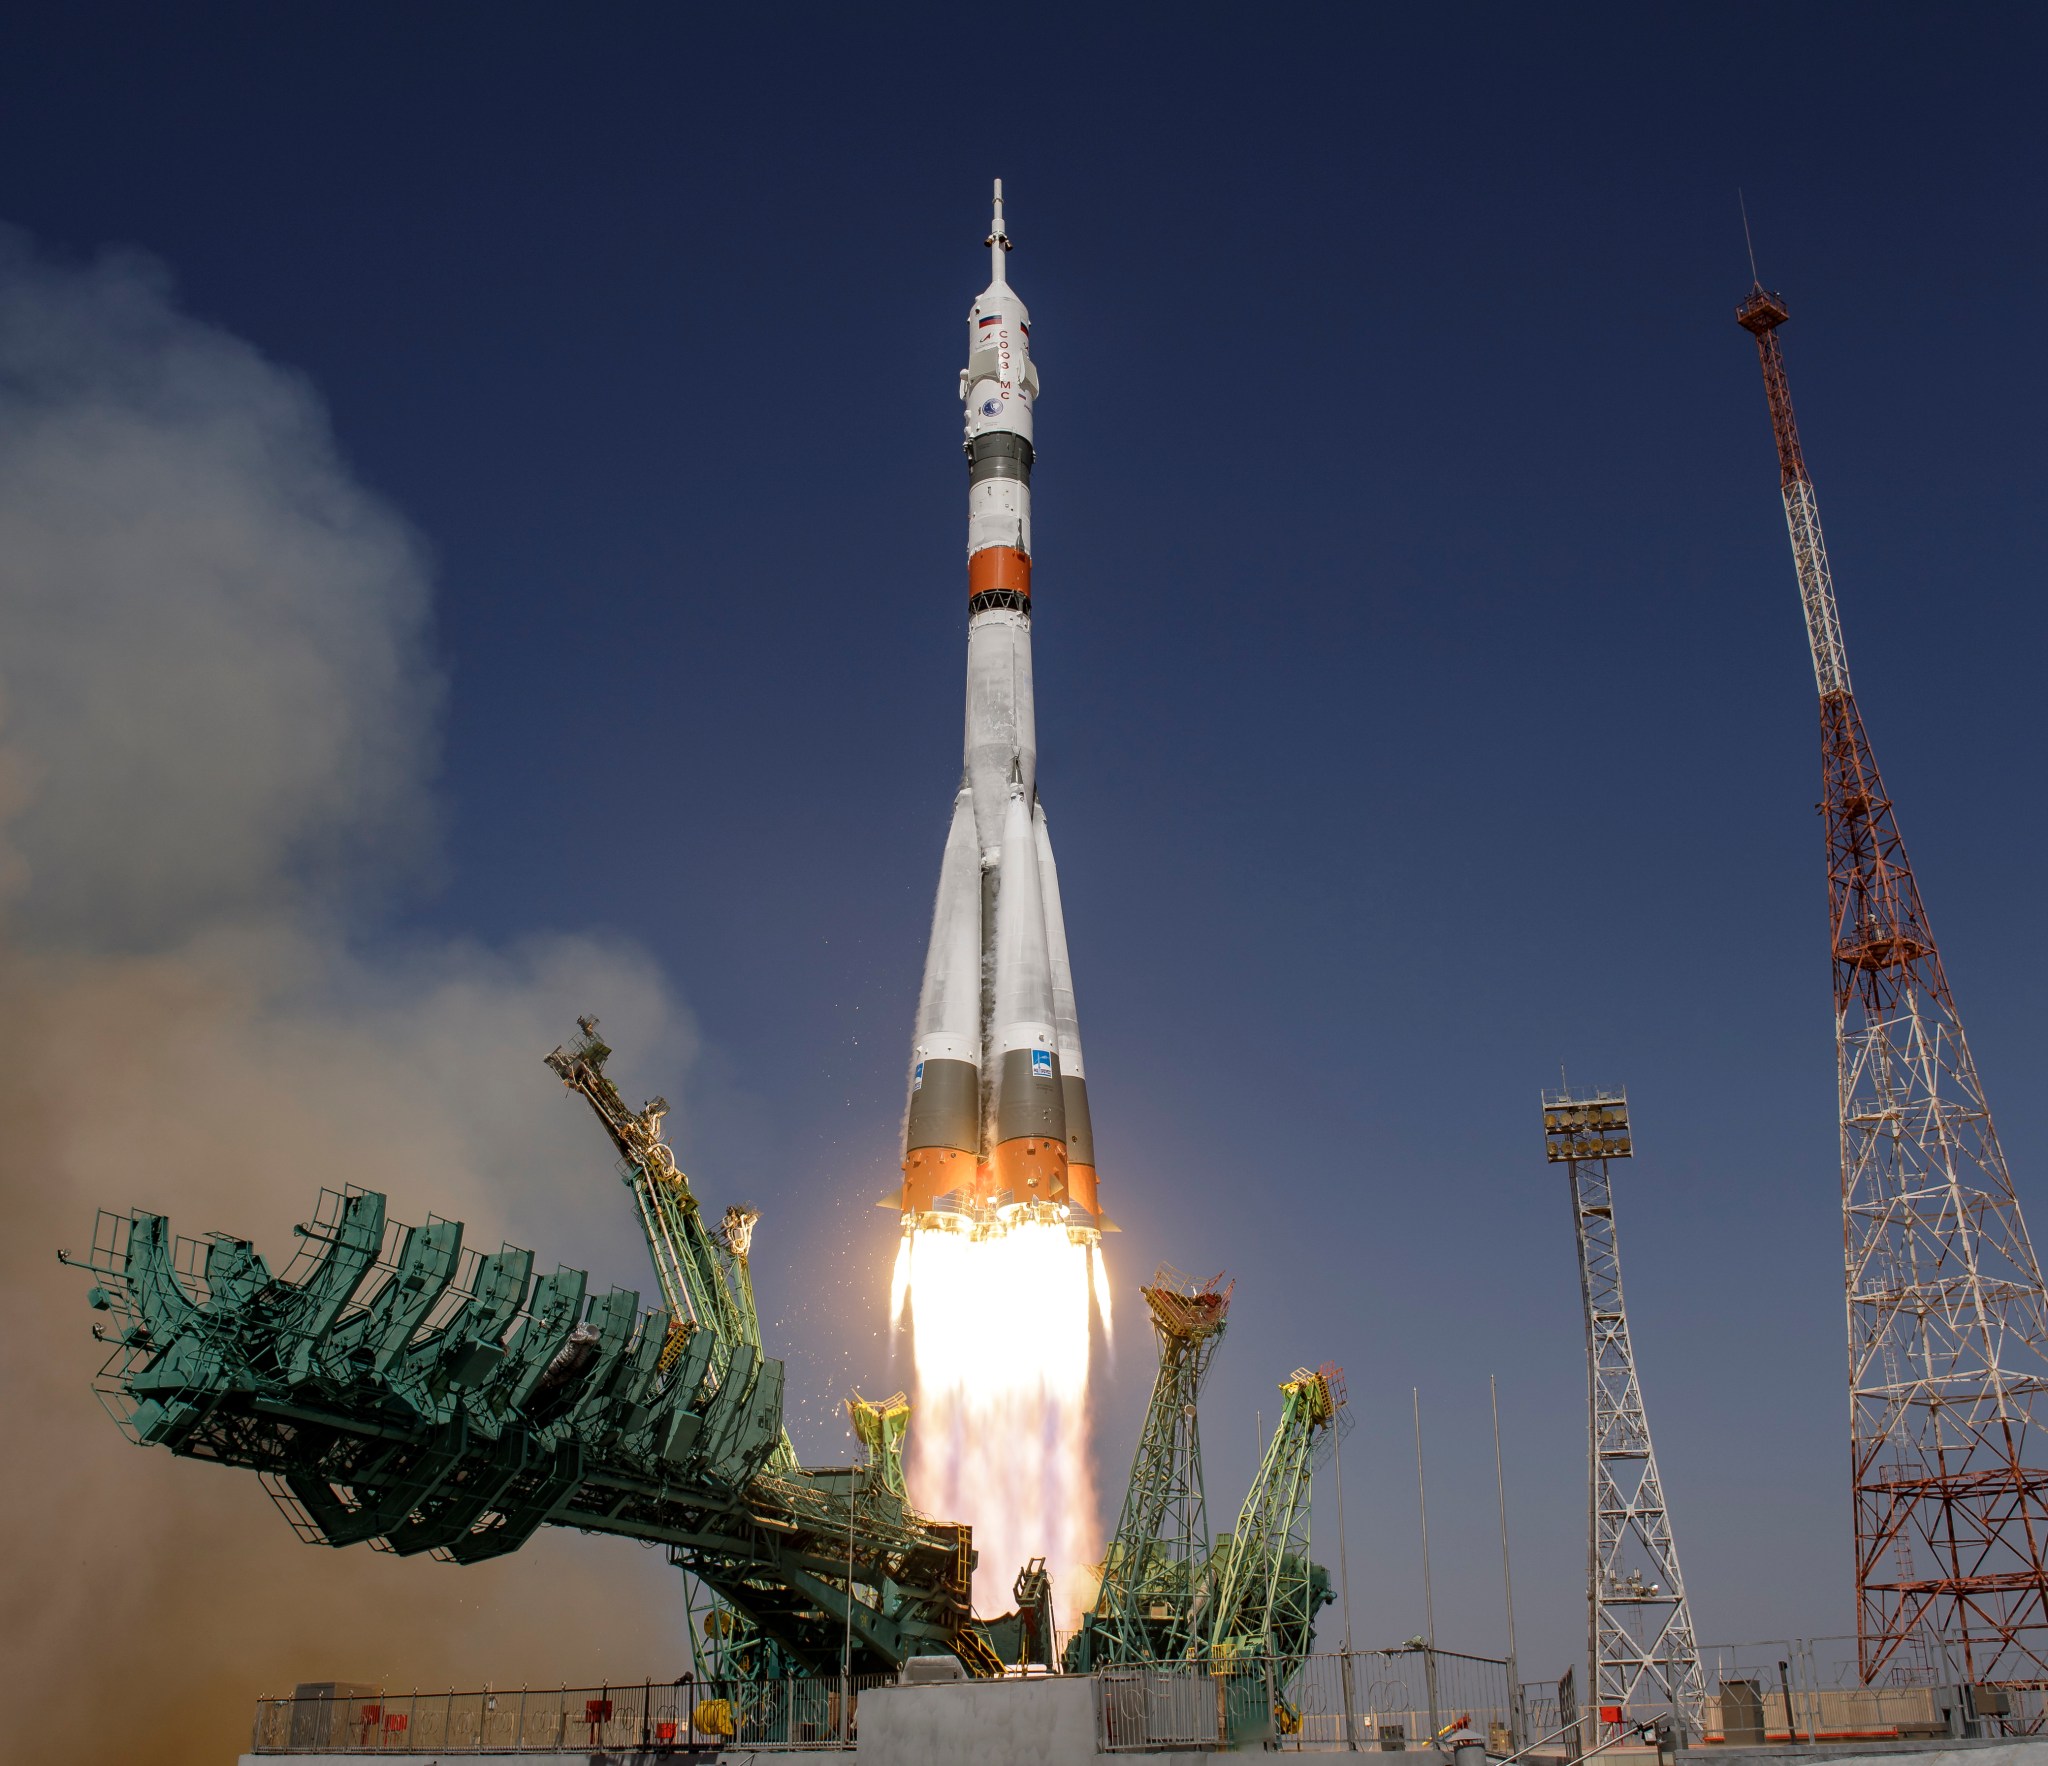 The Soyuz MS-18 rocket is launched April 9, 2021 at the Baikonur Cosmodrome in Kazakhstan.